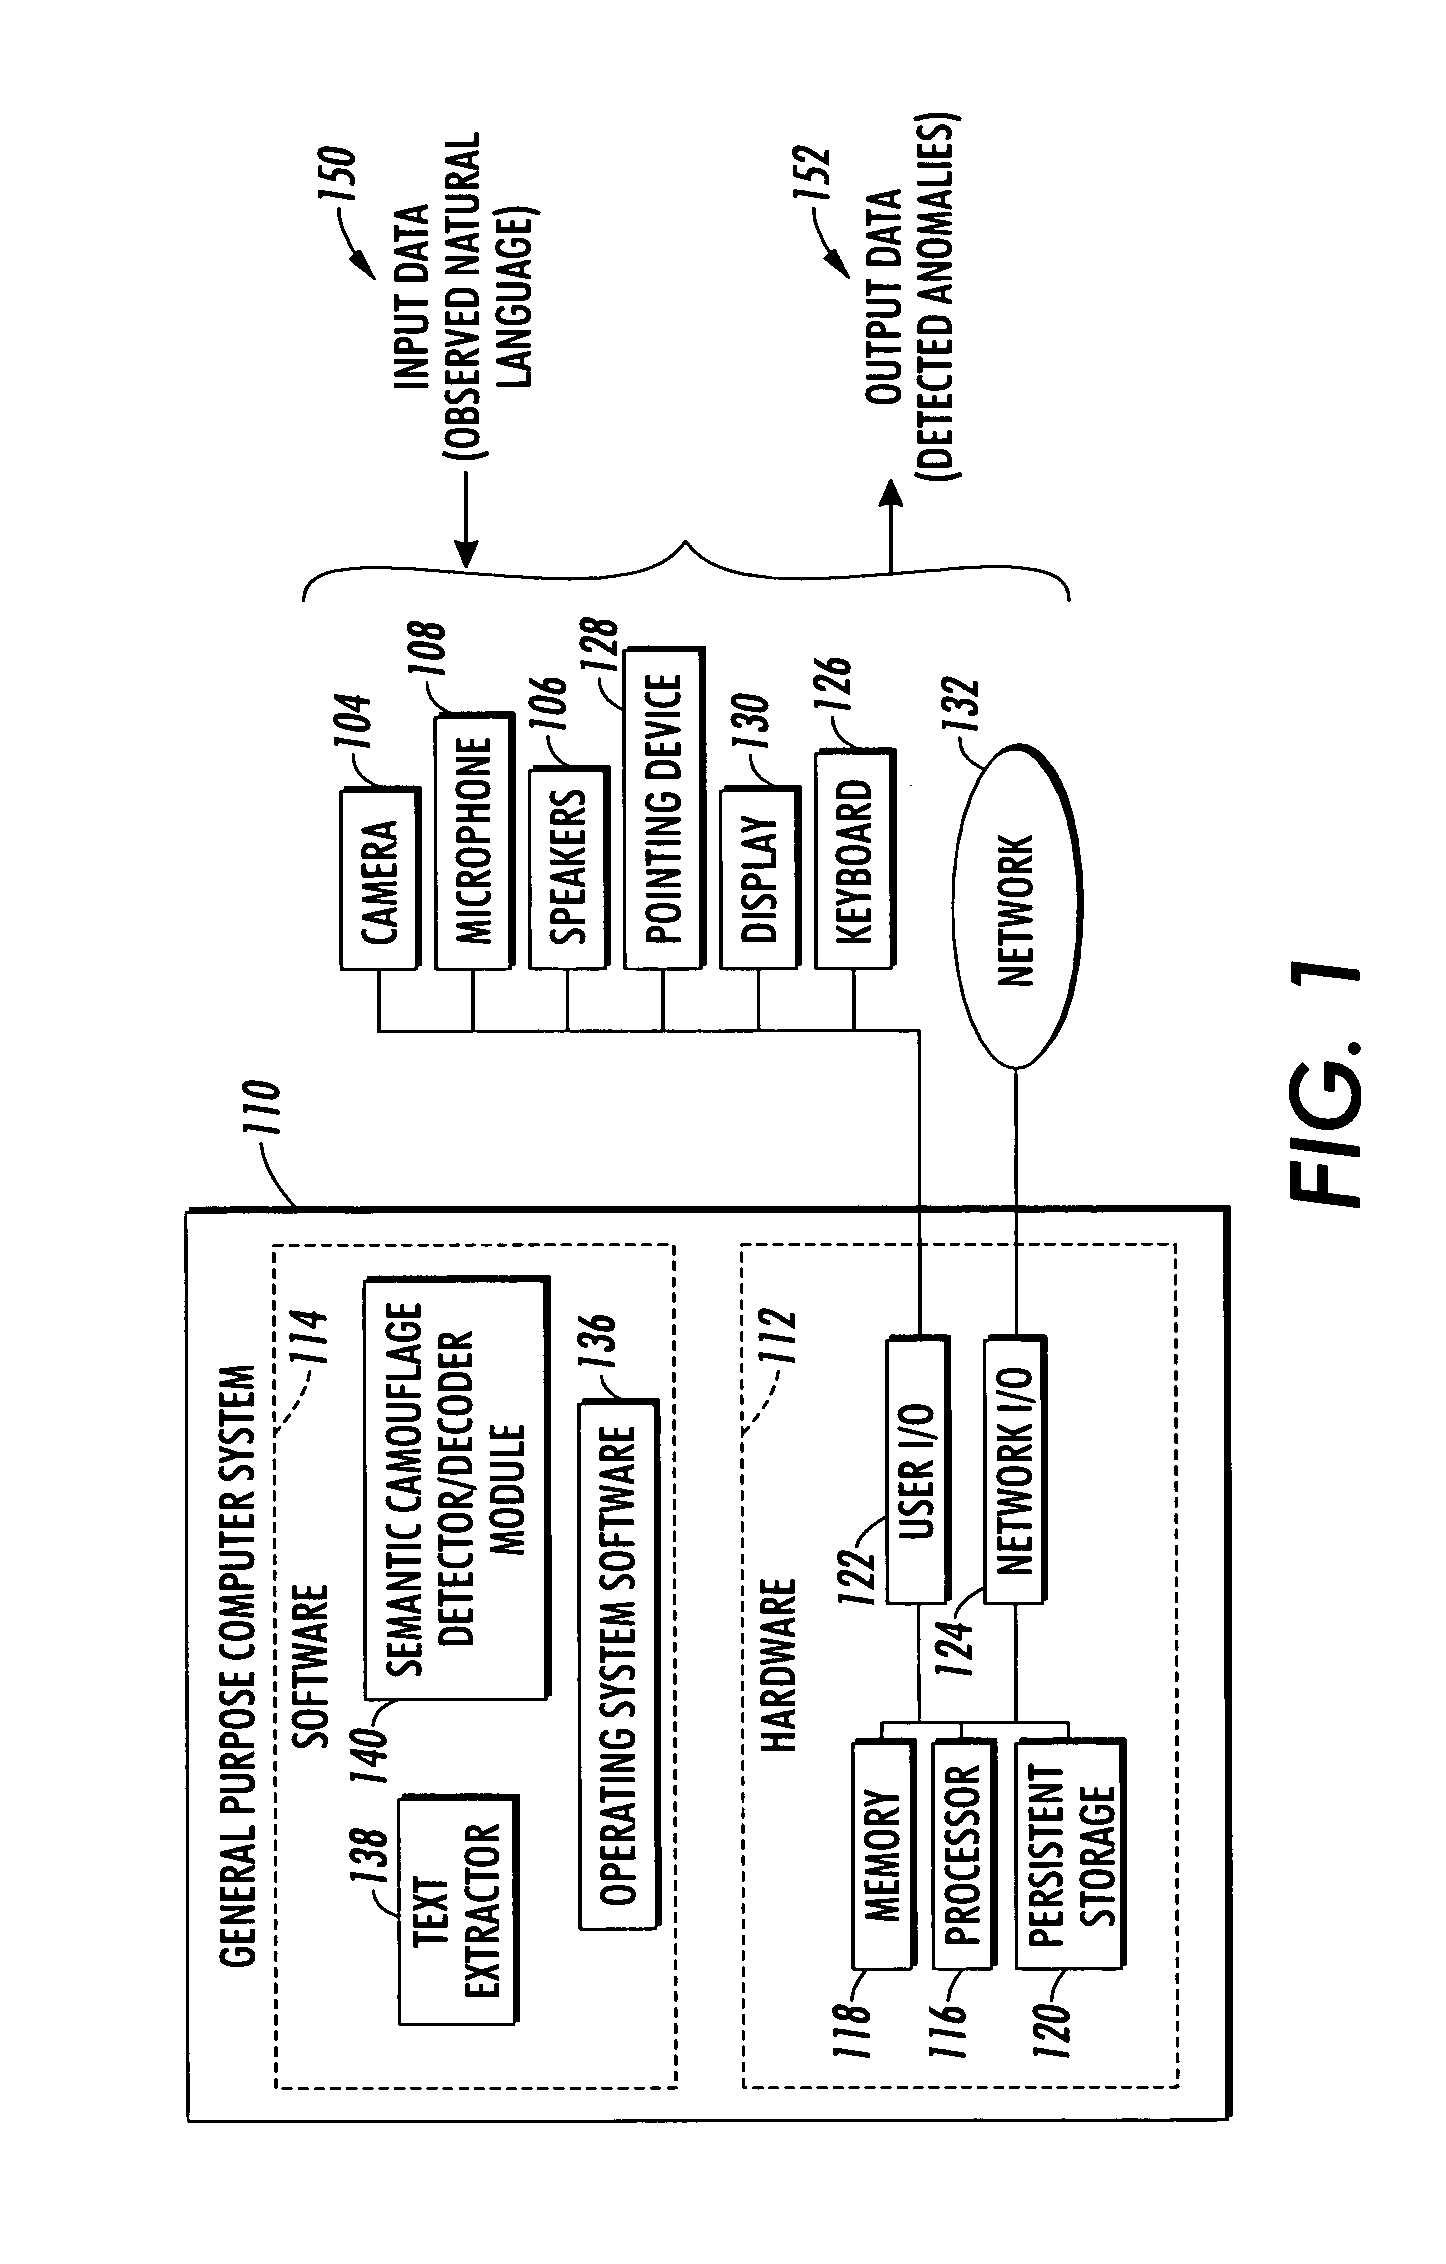 System and method for detecting and decoding semantically encoded natural language messages